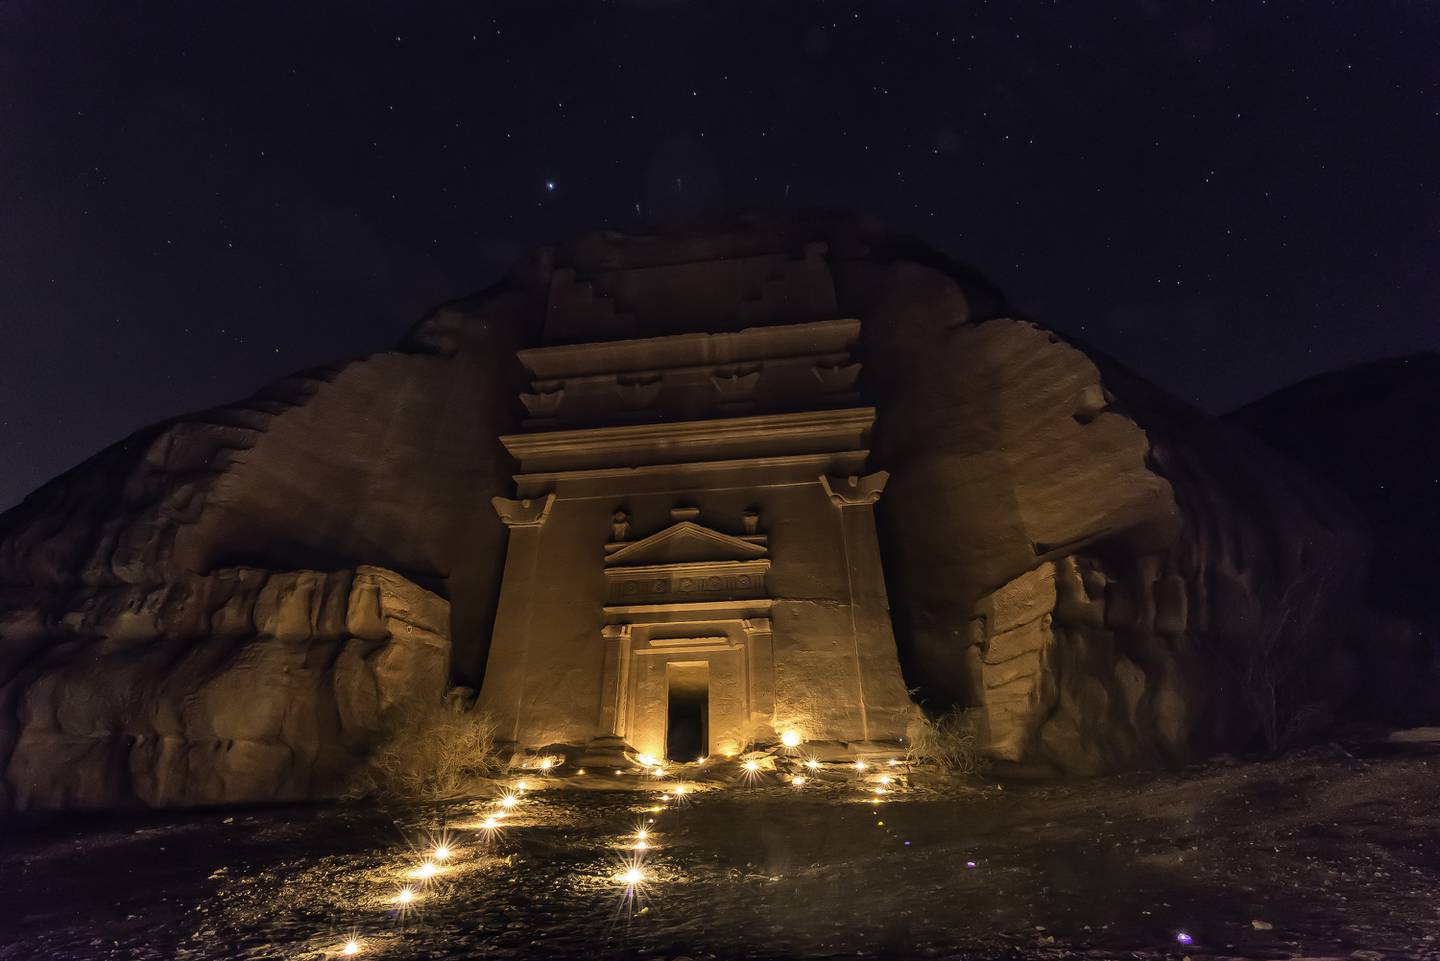 Hegra, the second-biggest Nabataean city after Petra, is located in AlUla and marks the first Unesco World Heritage Site in Saudi Arabia. Photo: Film AlUla